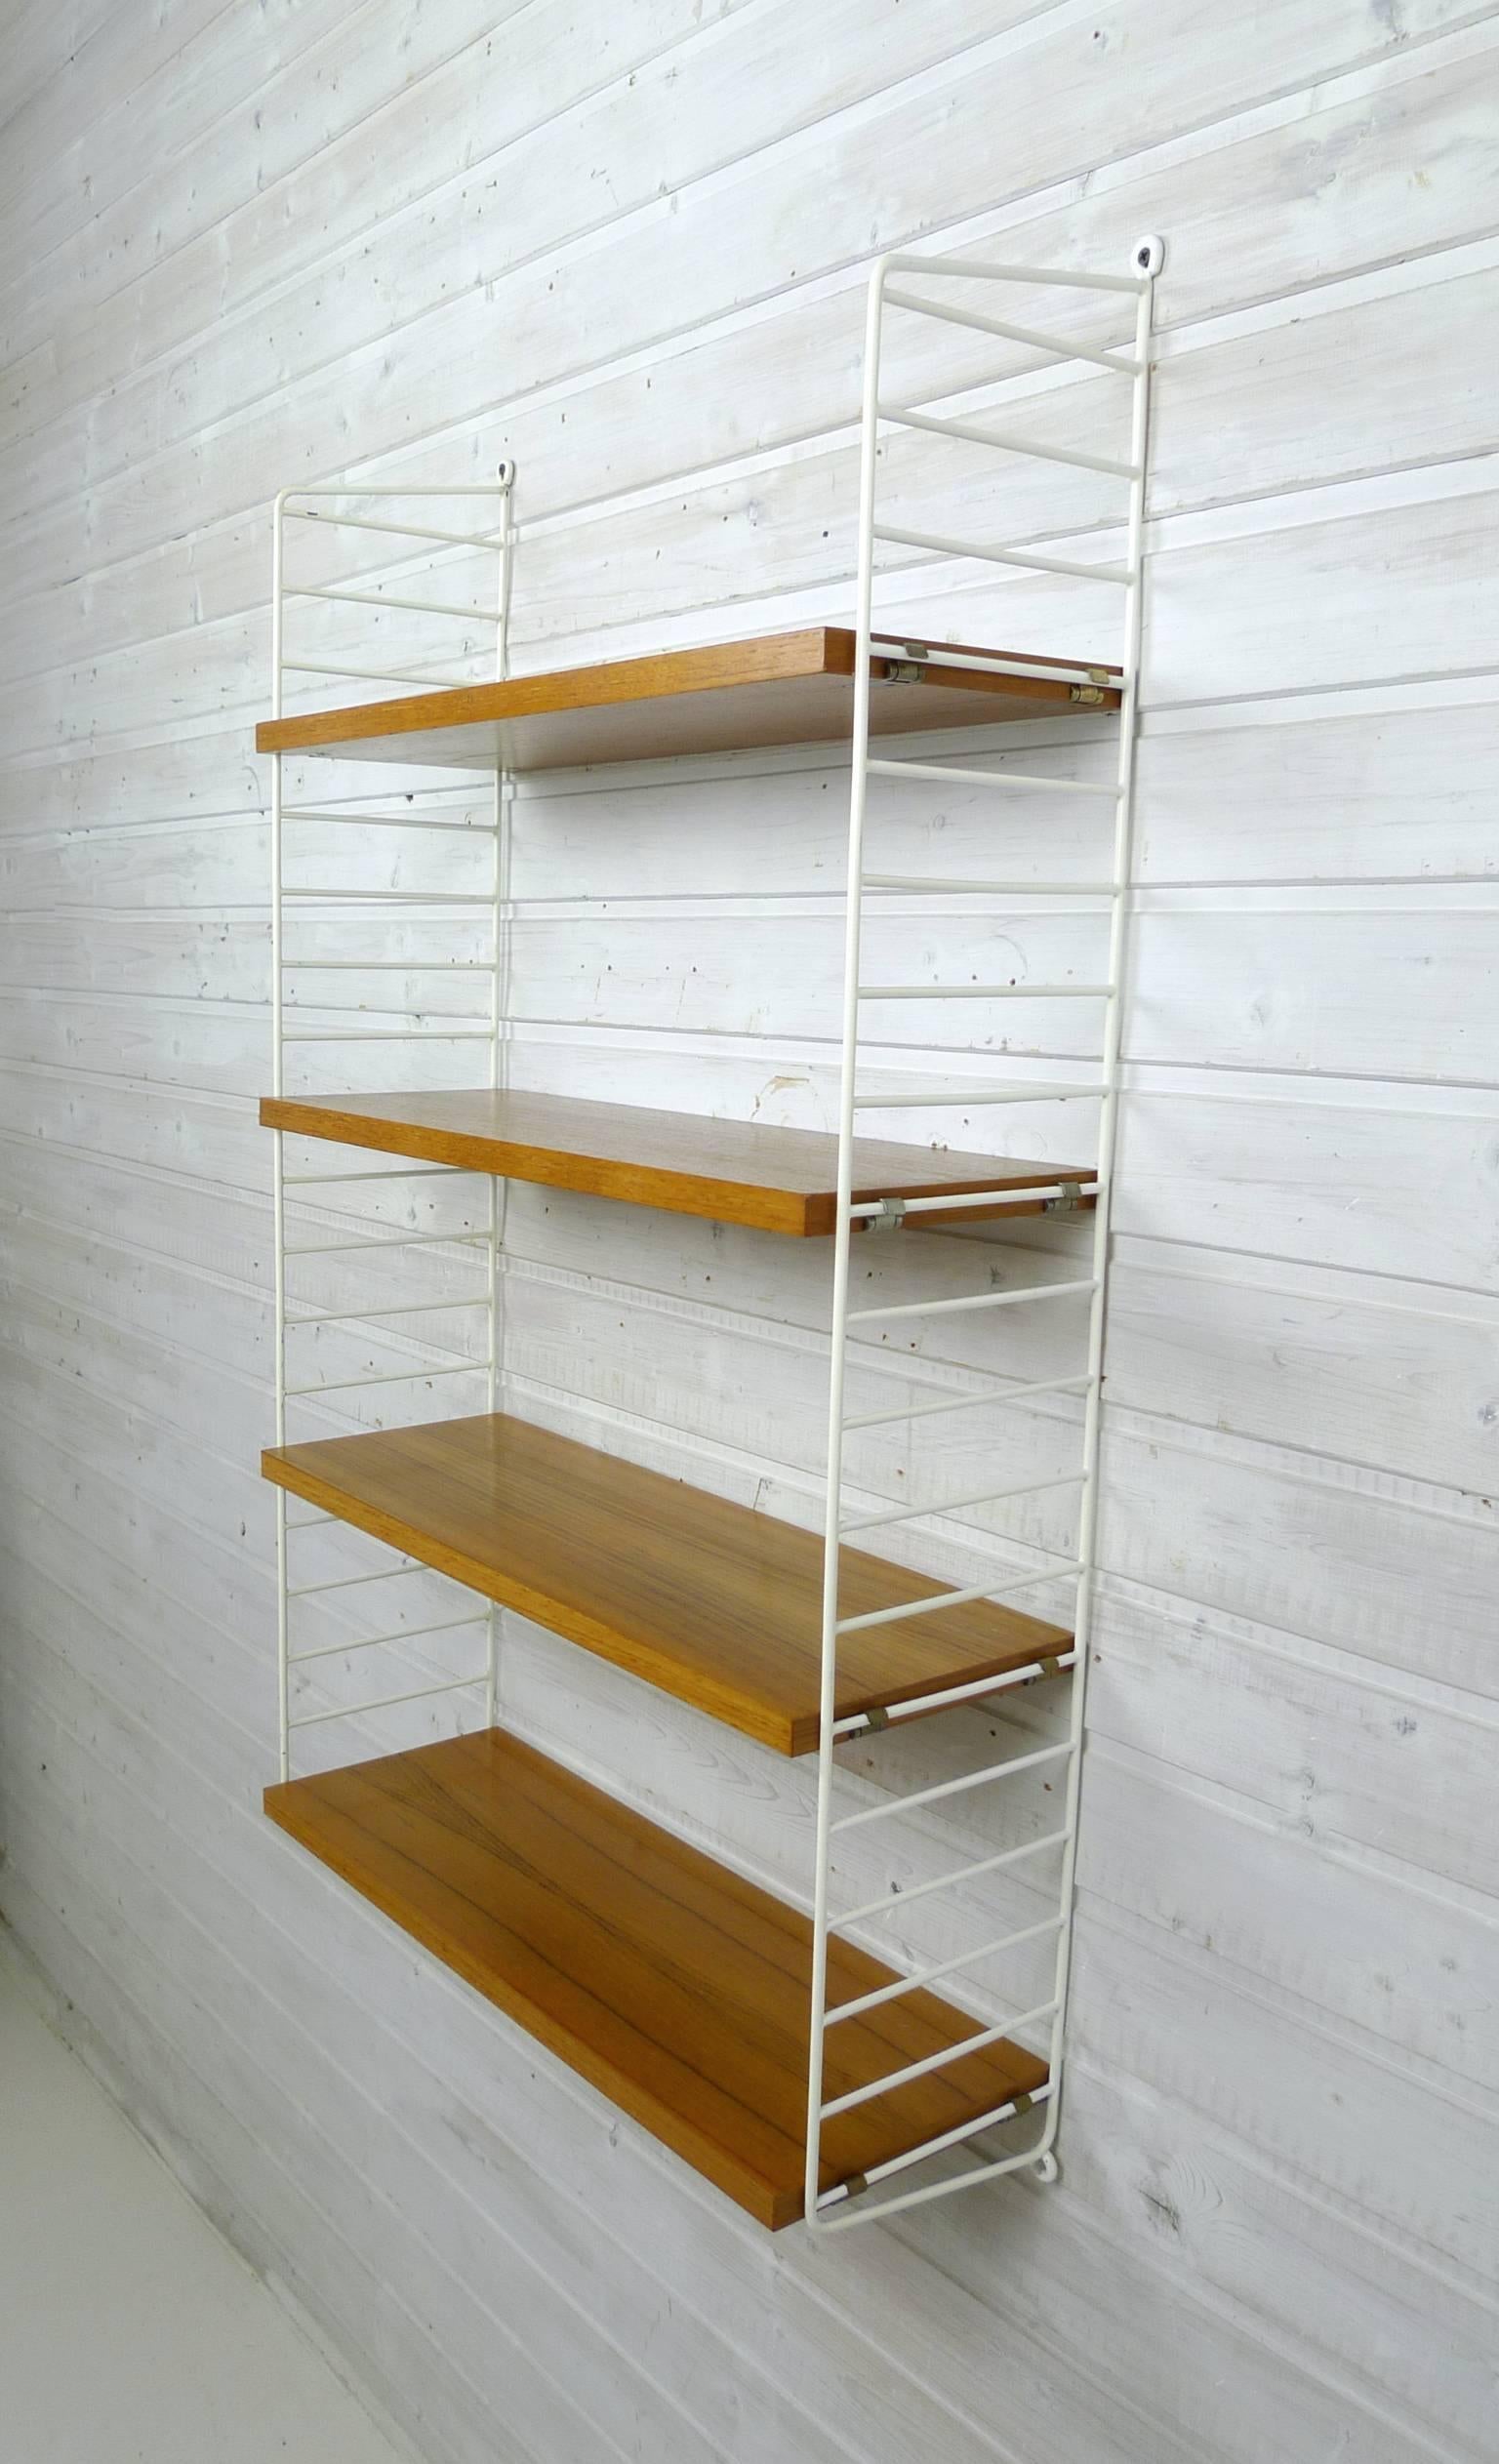 20th Century Teak Wall Shelving System by Nisse Strinning for String Design AB, Sweden, 1960s